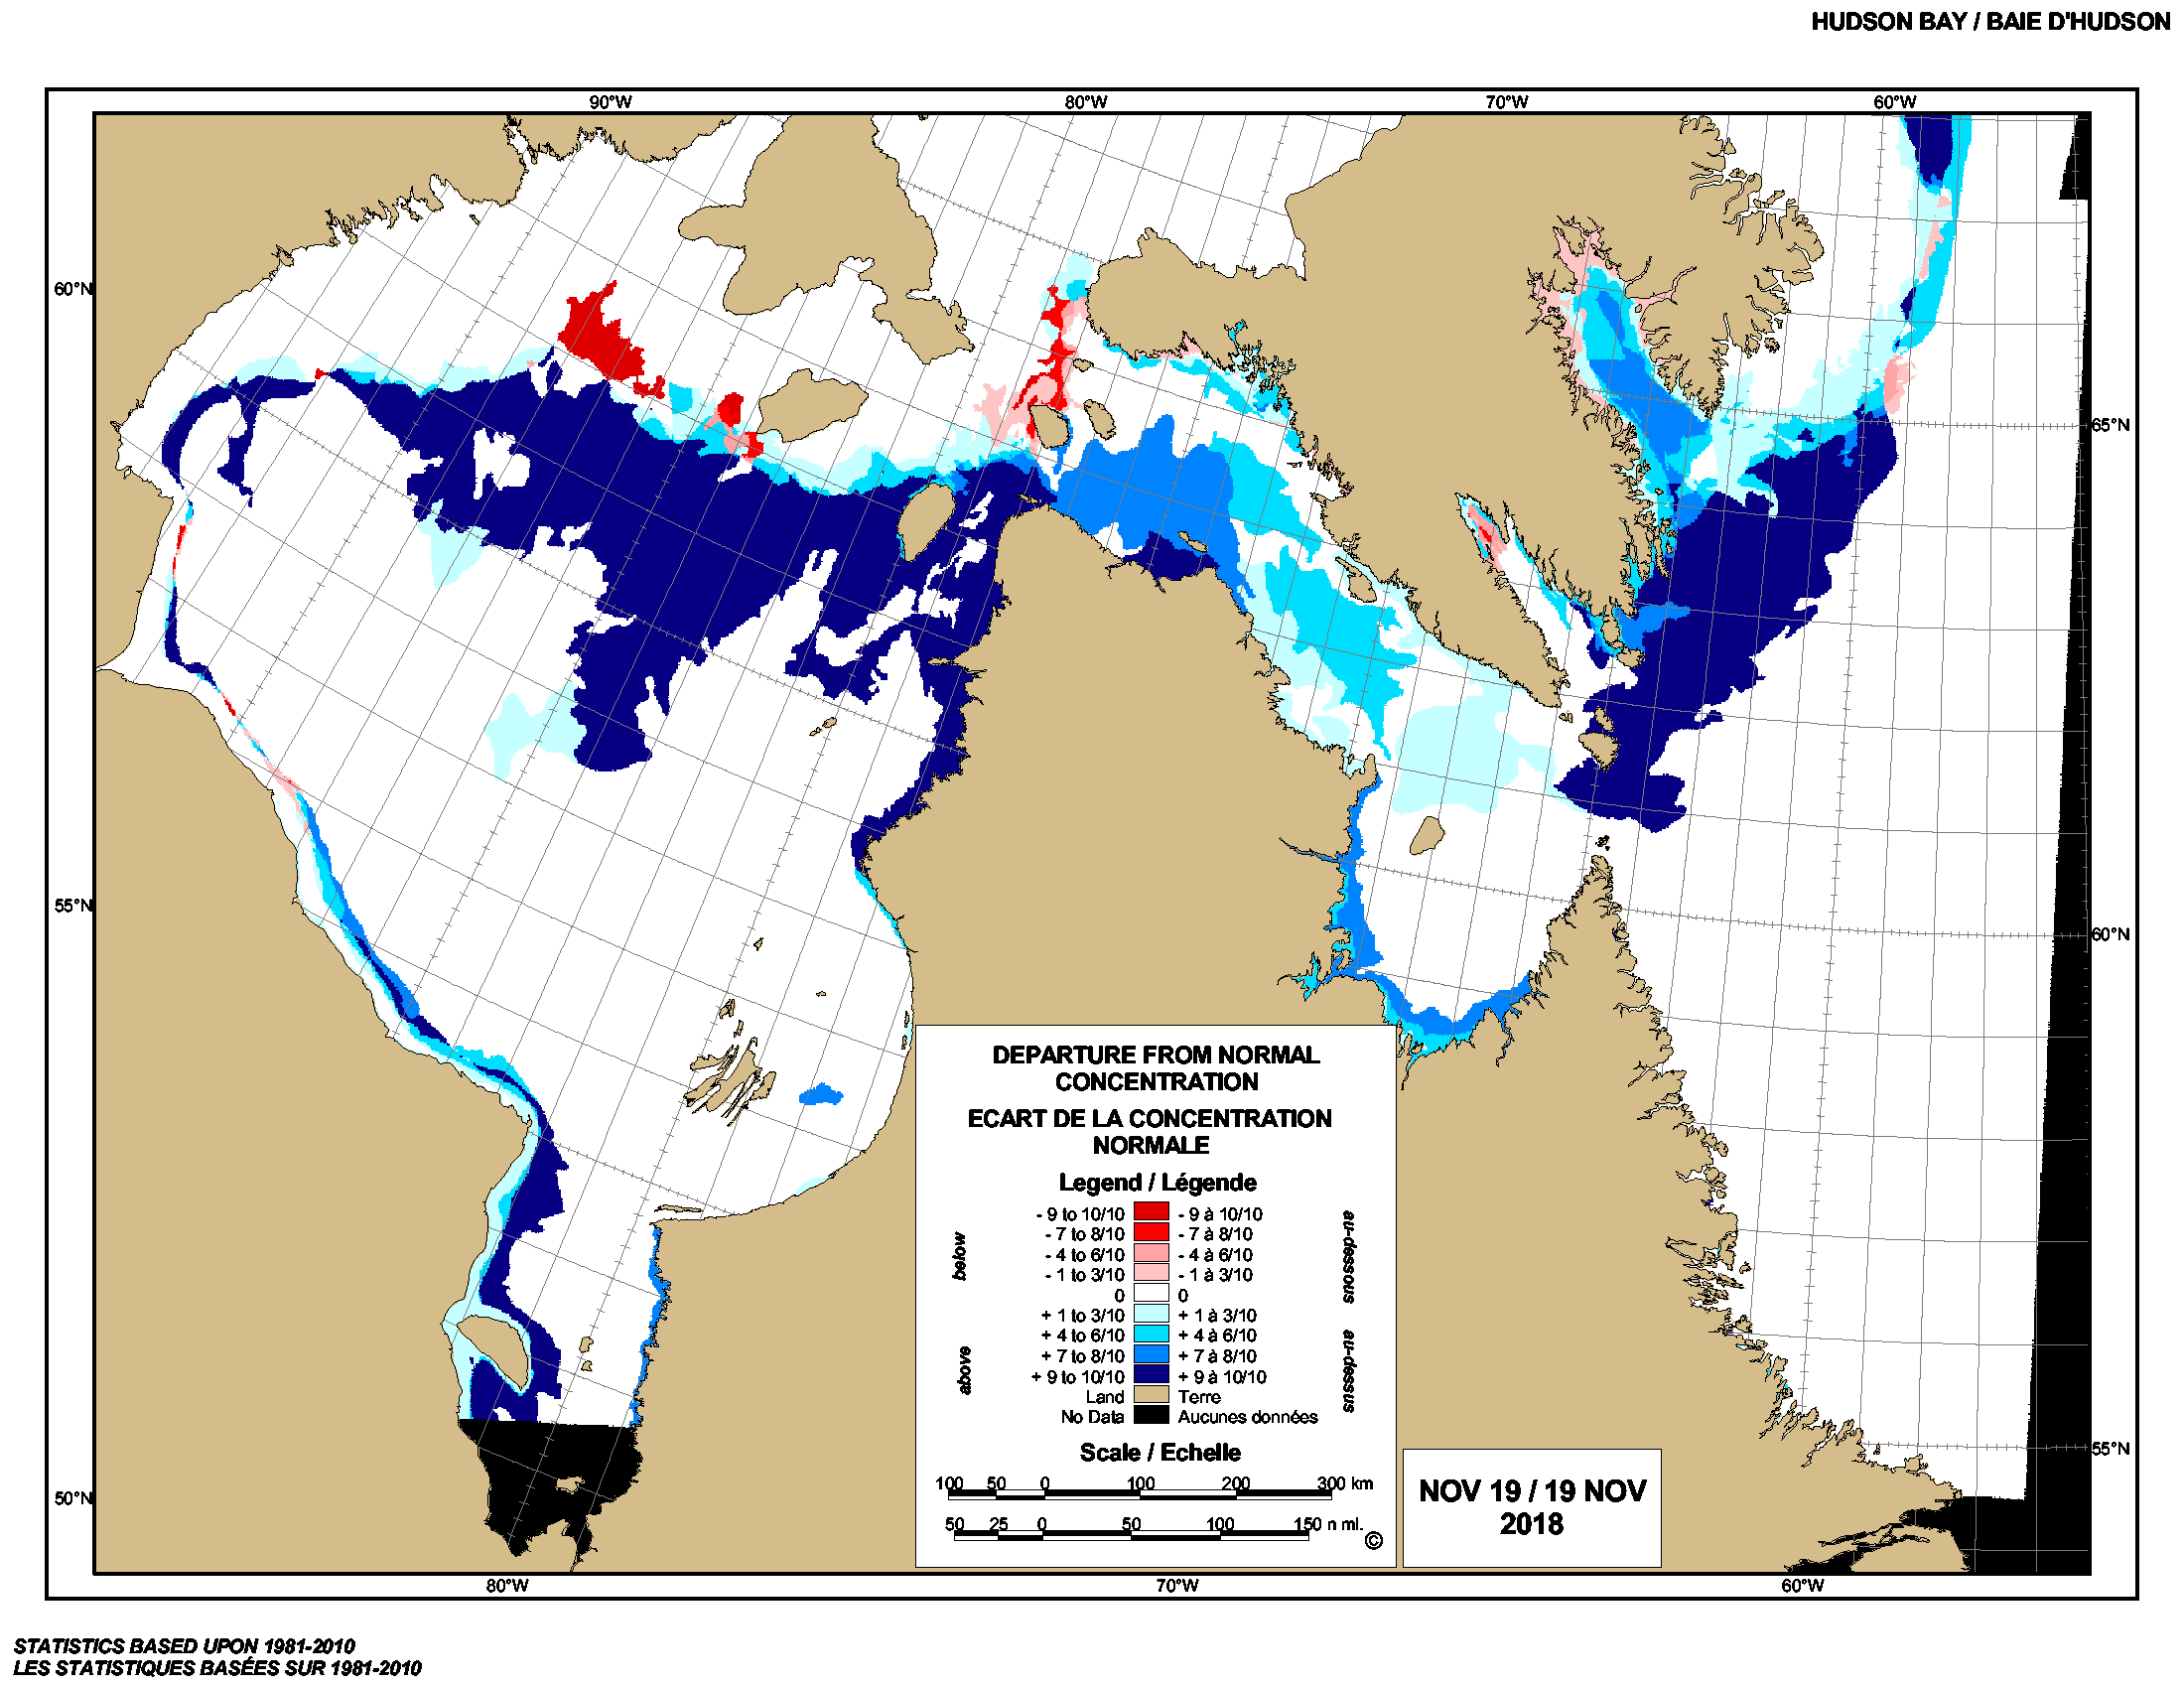 Ice Concentration Departure [click to enlarge]